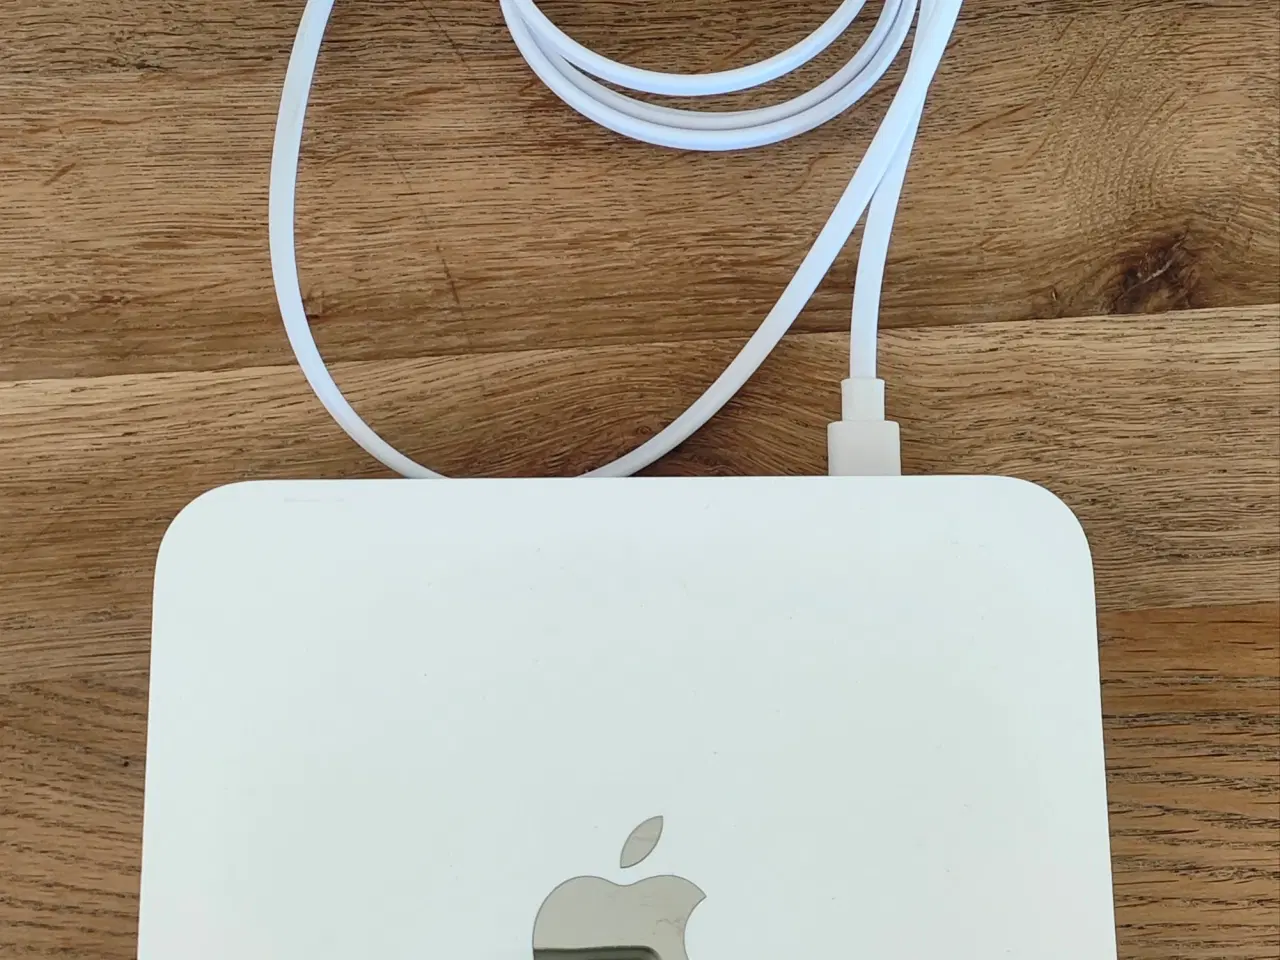 Billede 1 - Access point, Apple Time Capsule 1TB A1355